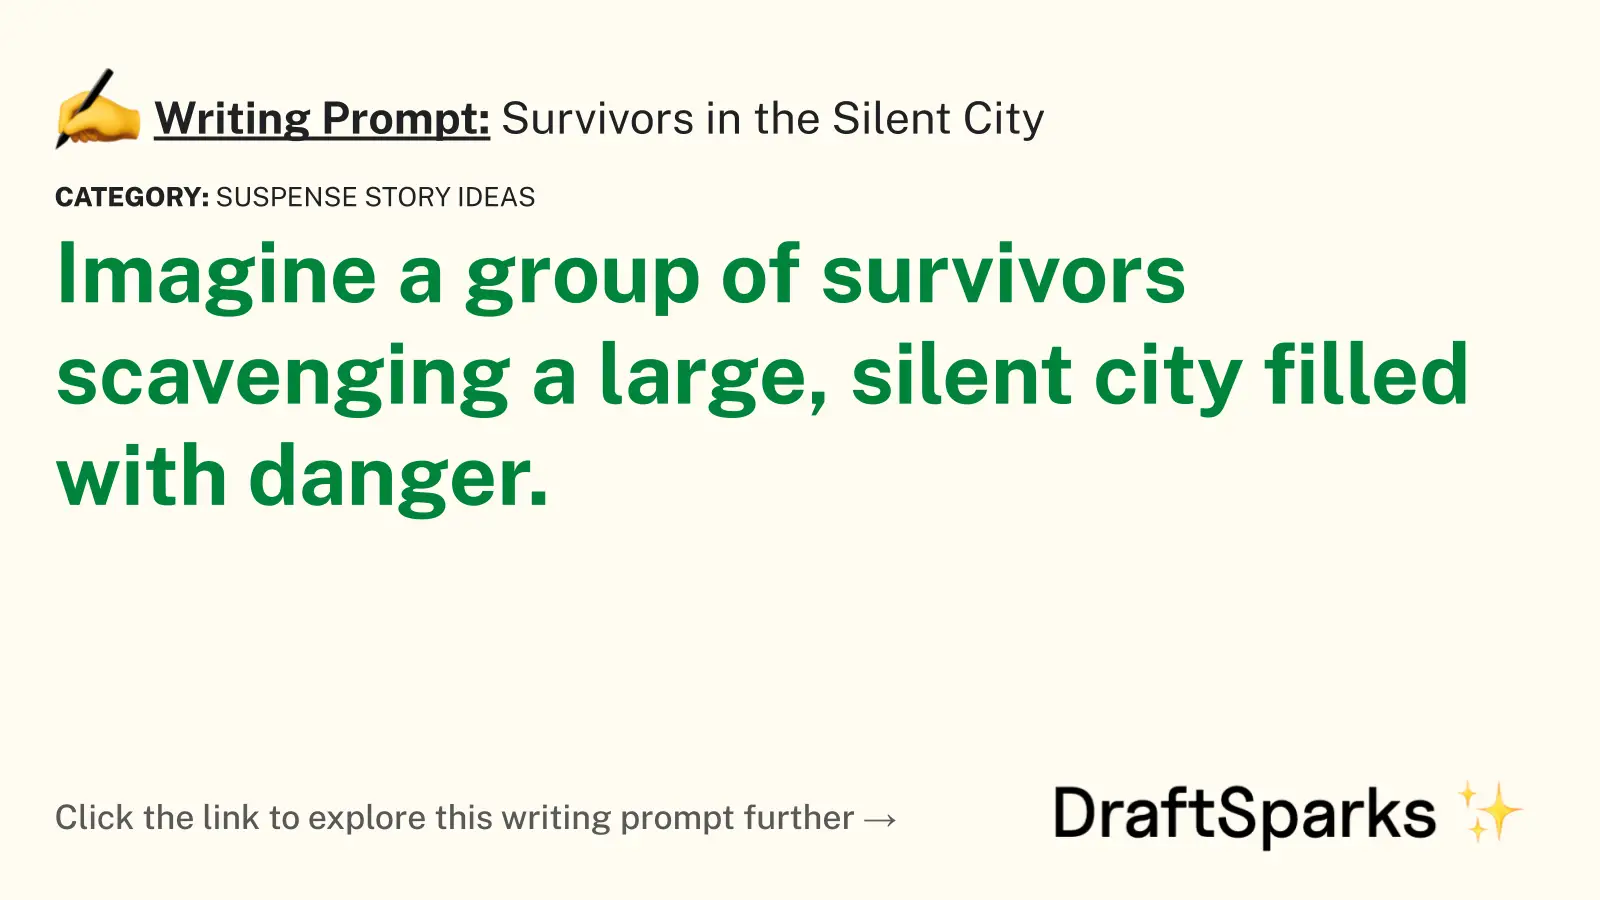 Survivors in the Silent City